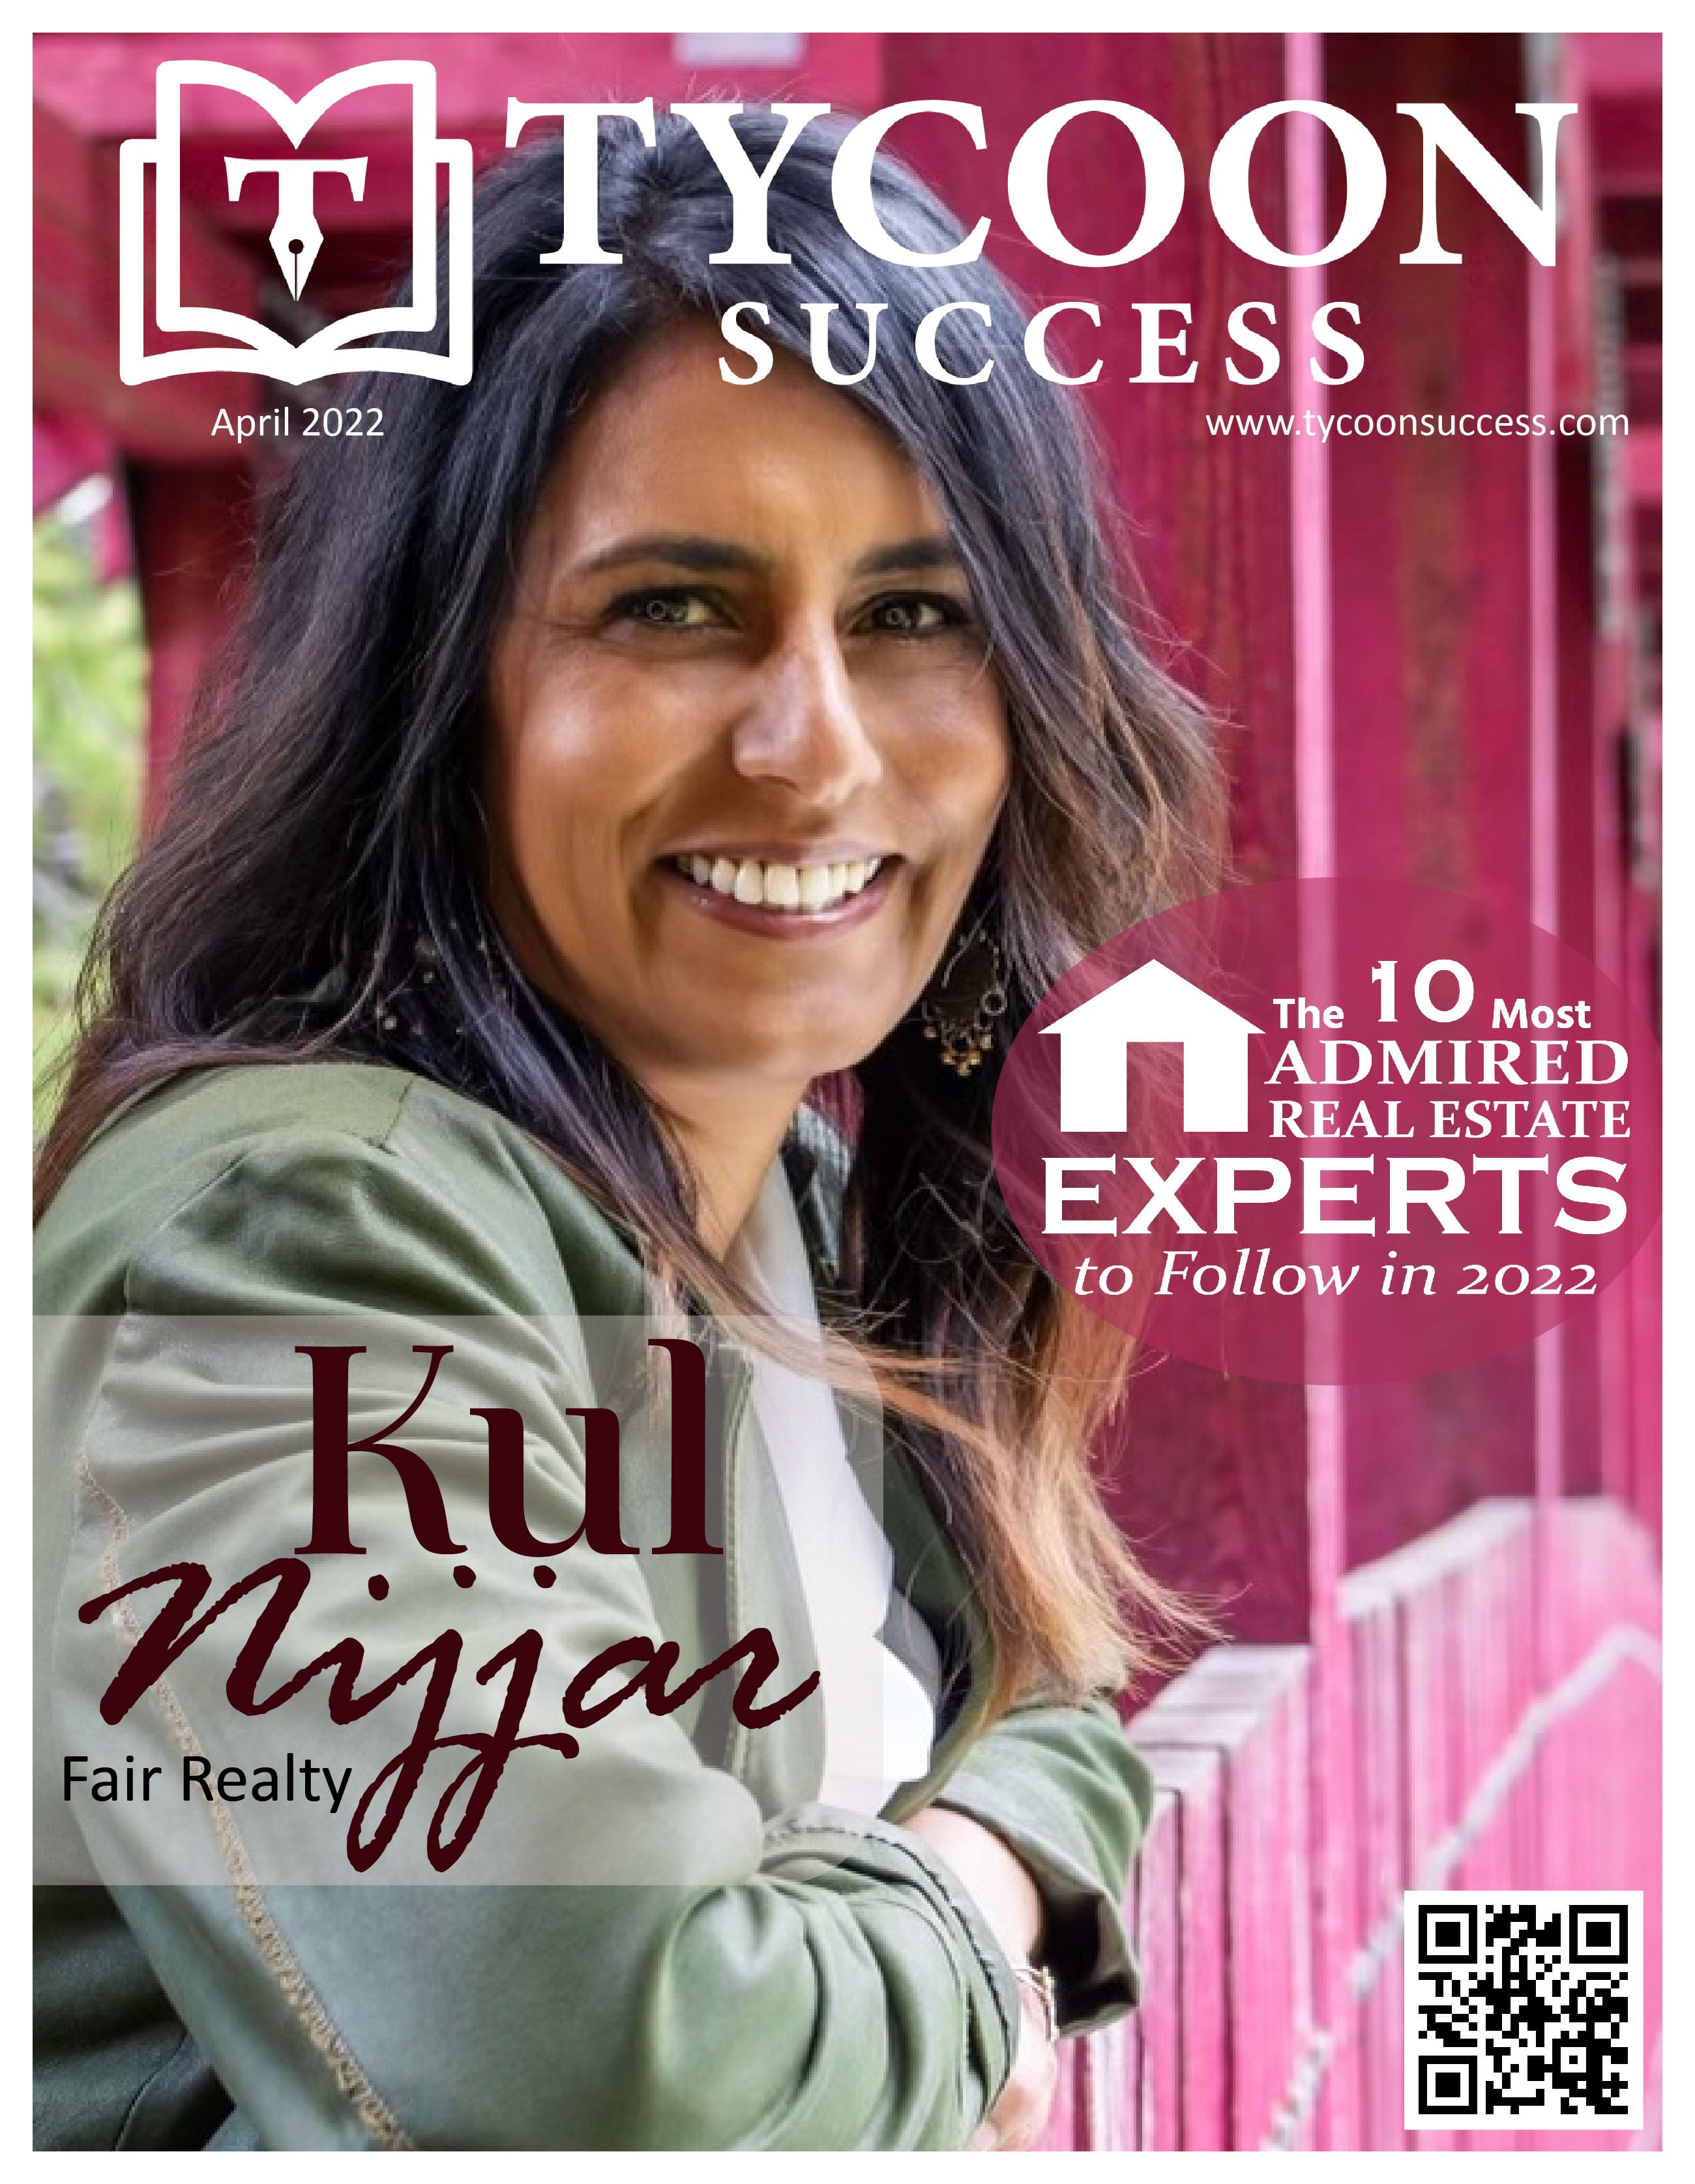 Cover Page | The 10 Most Admired Real Estate Experts to Follow in 2022 | Tycoon Success | Business Magazine